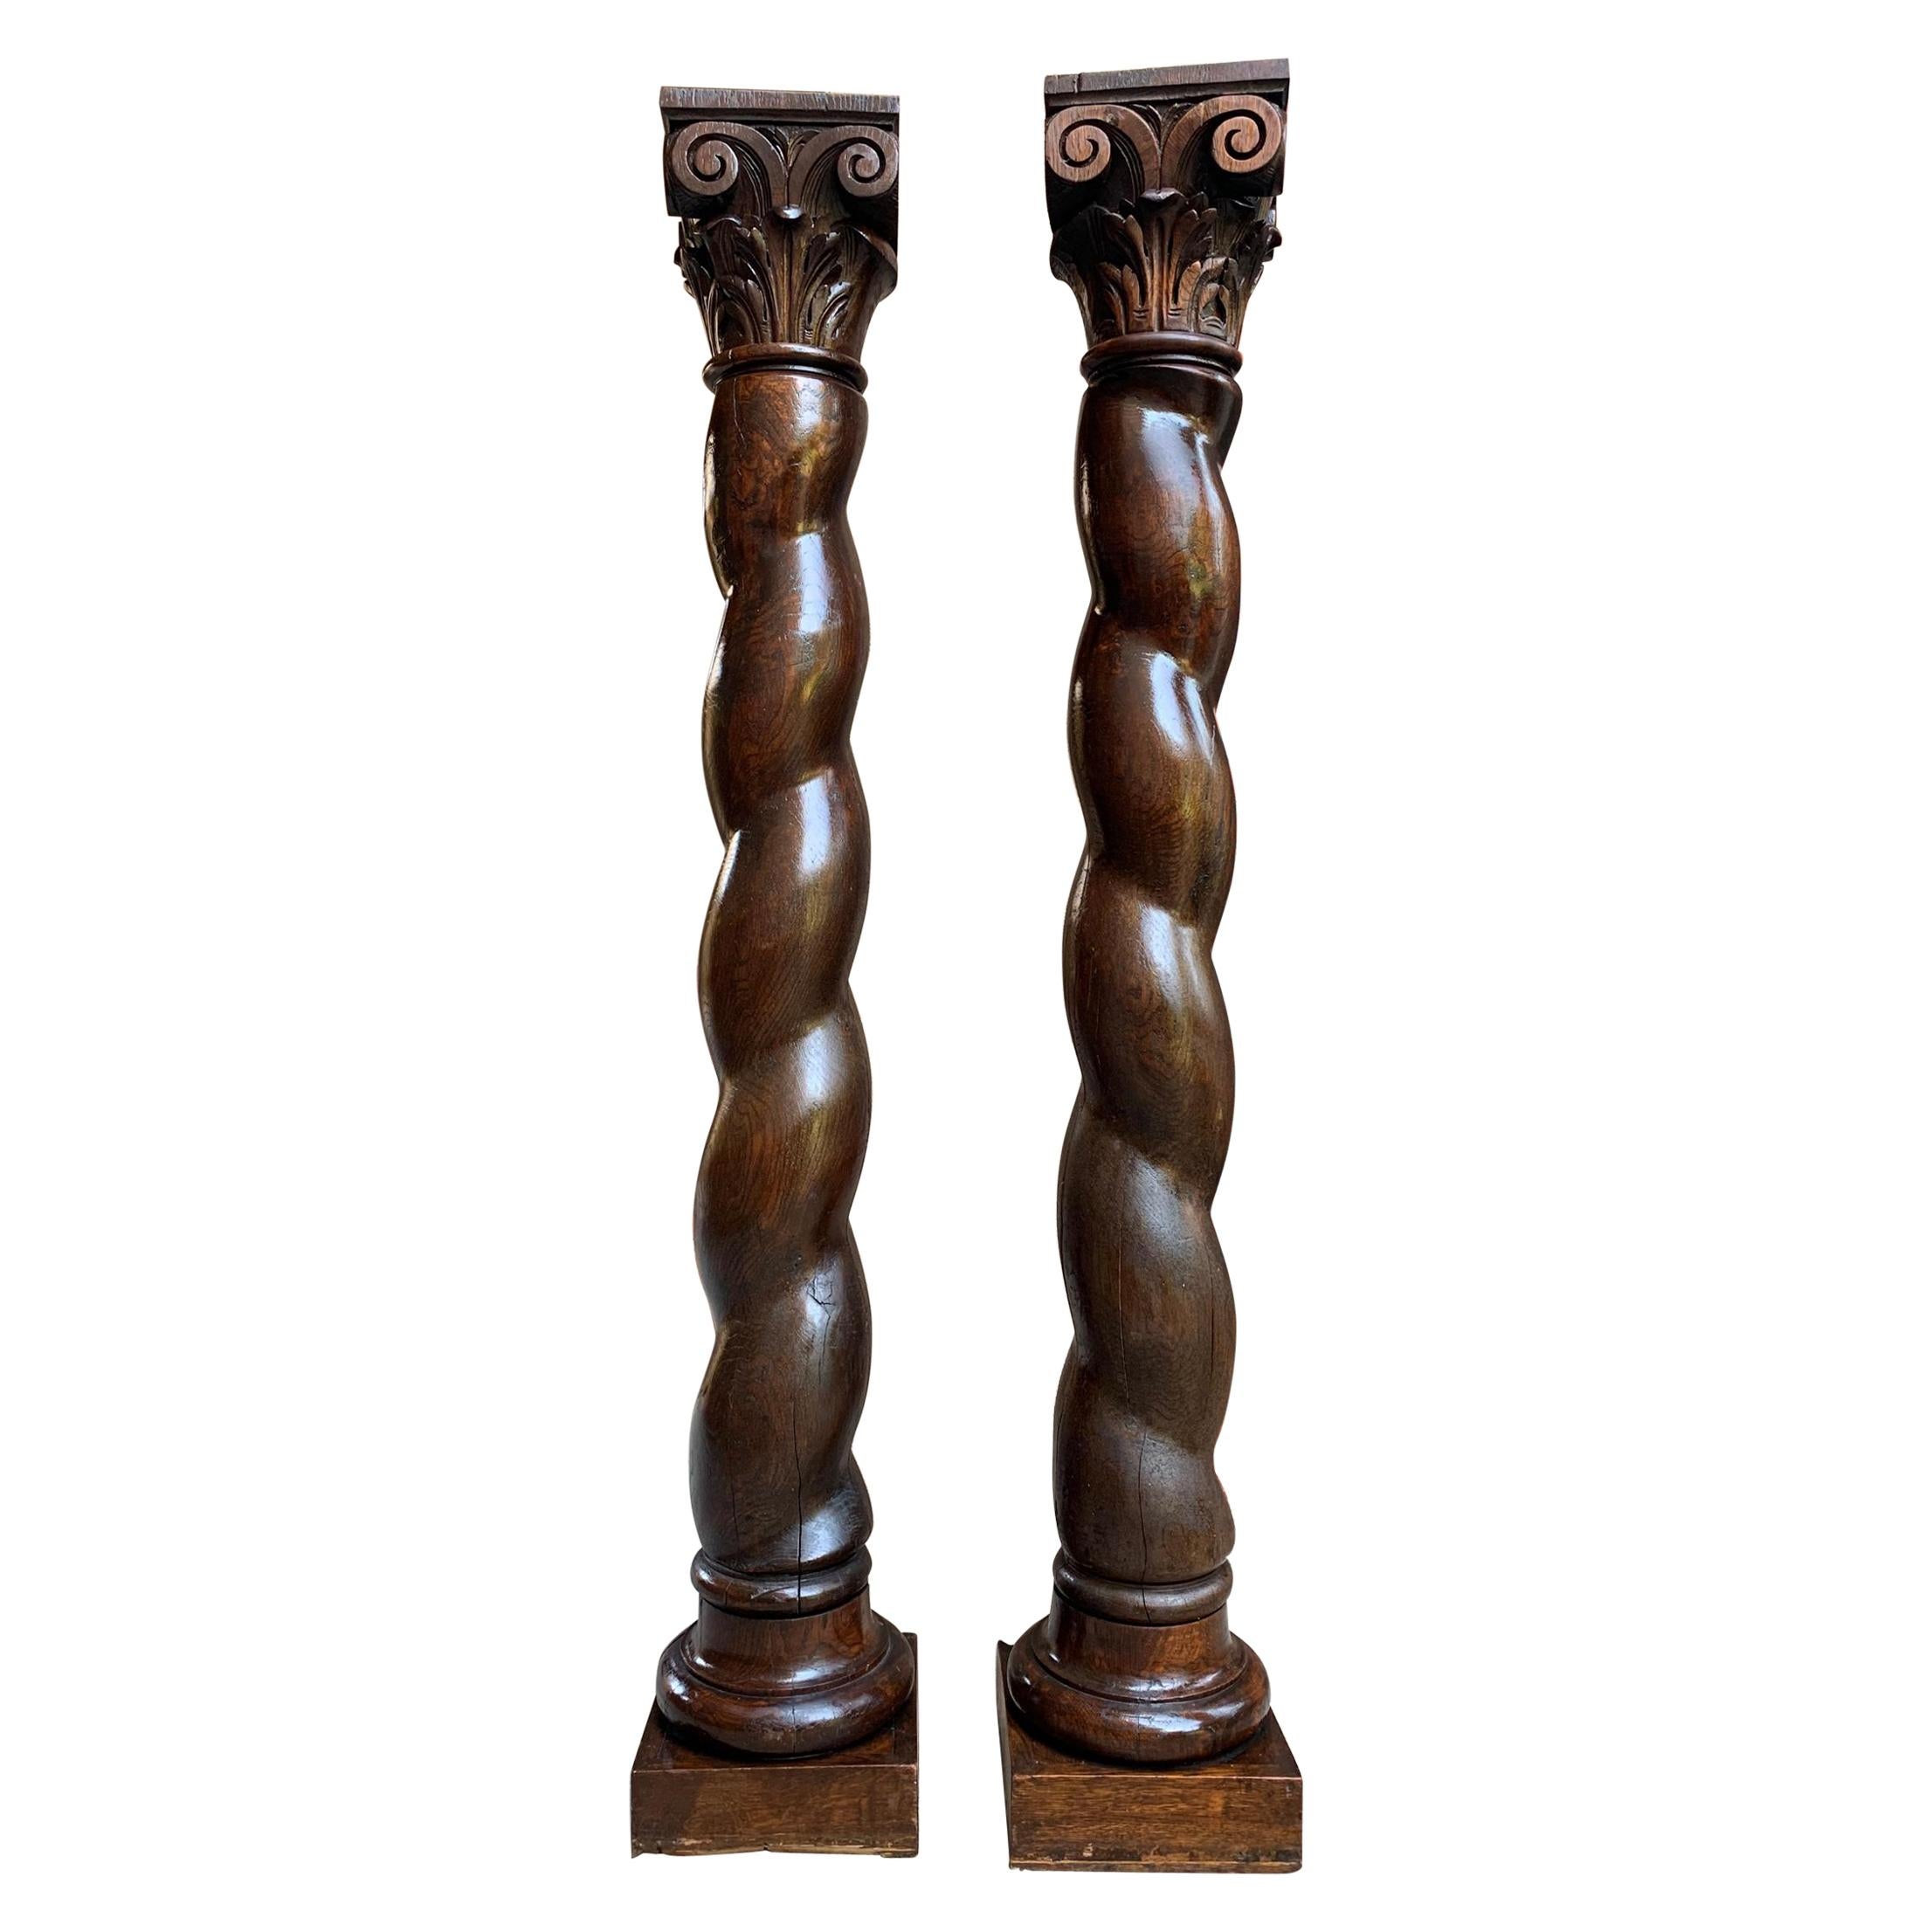 Pair of French Carved Oak Barley Twist Column Baluster Architectural Salvage